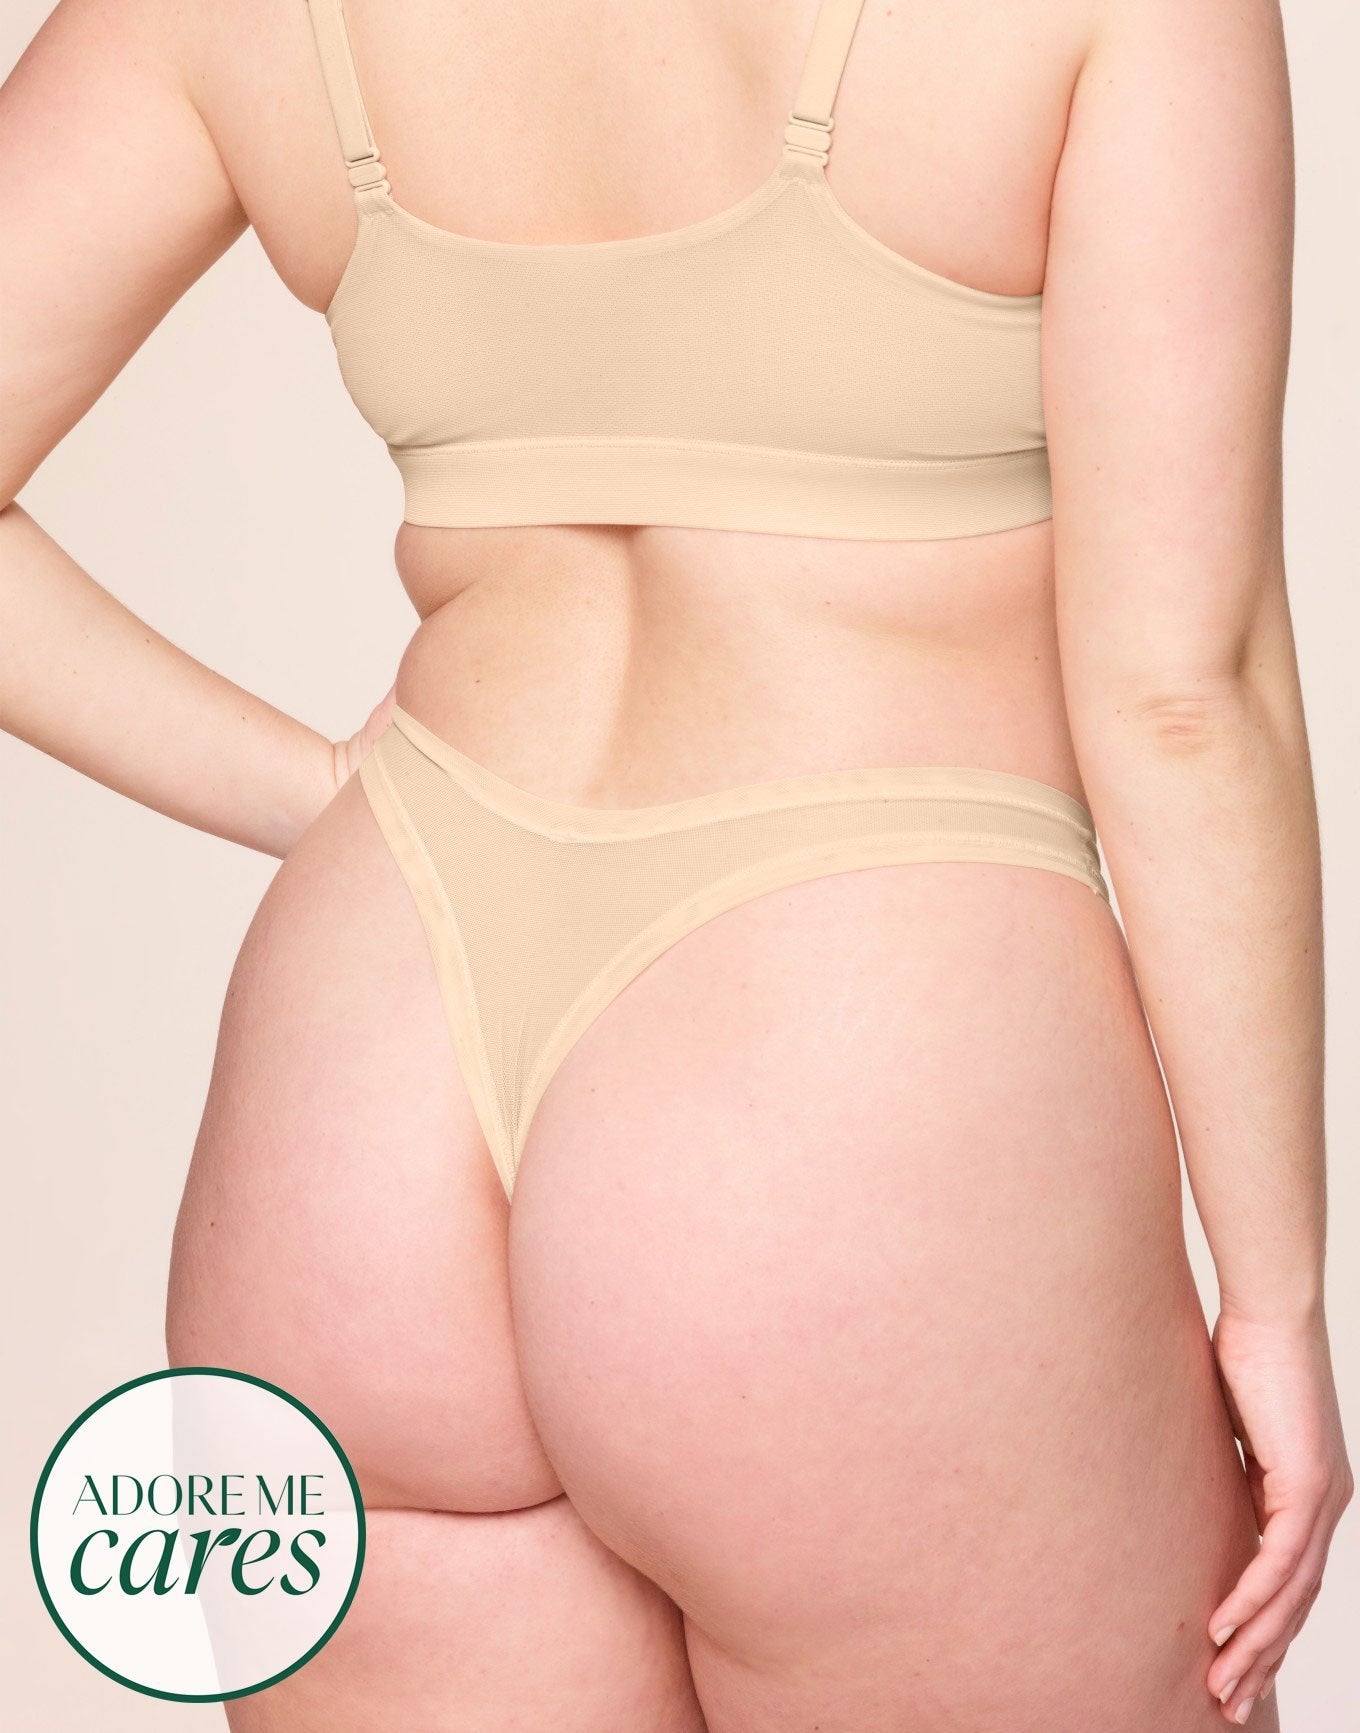 nueskin Bonnie Mesh Low-Rise Thong in color Appleblossom and shape thong